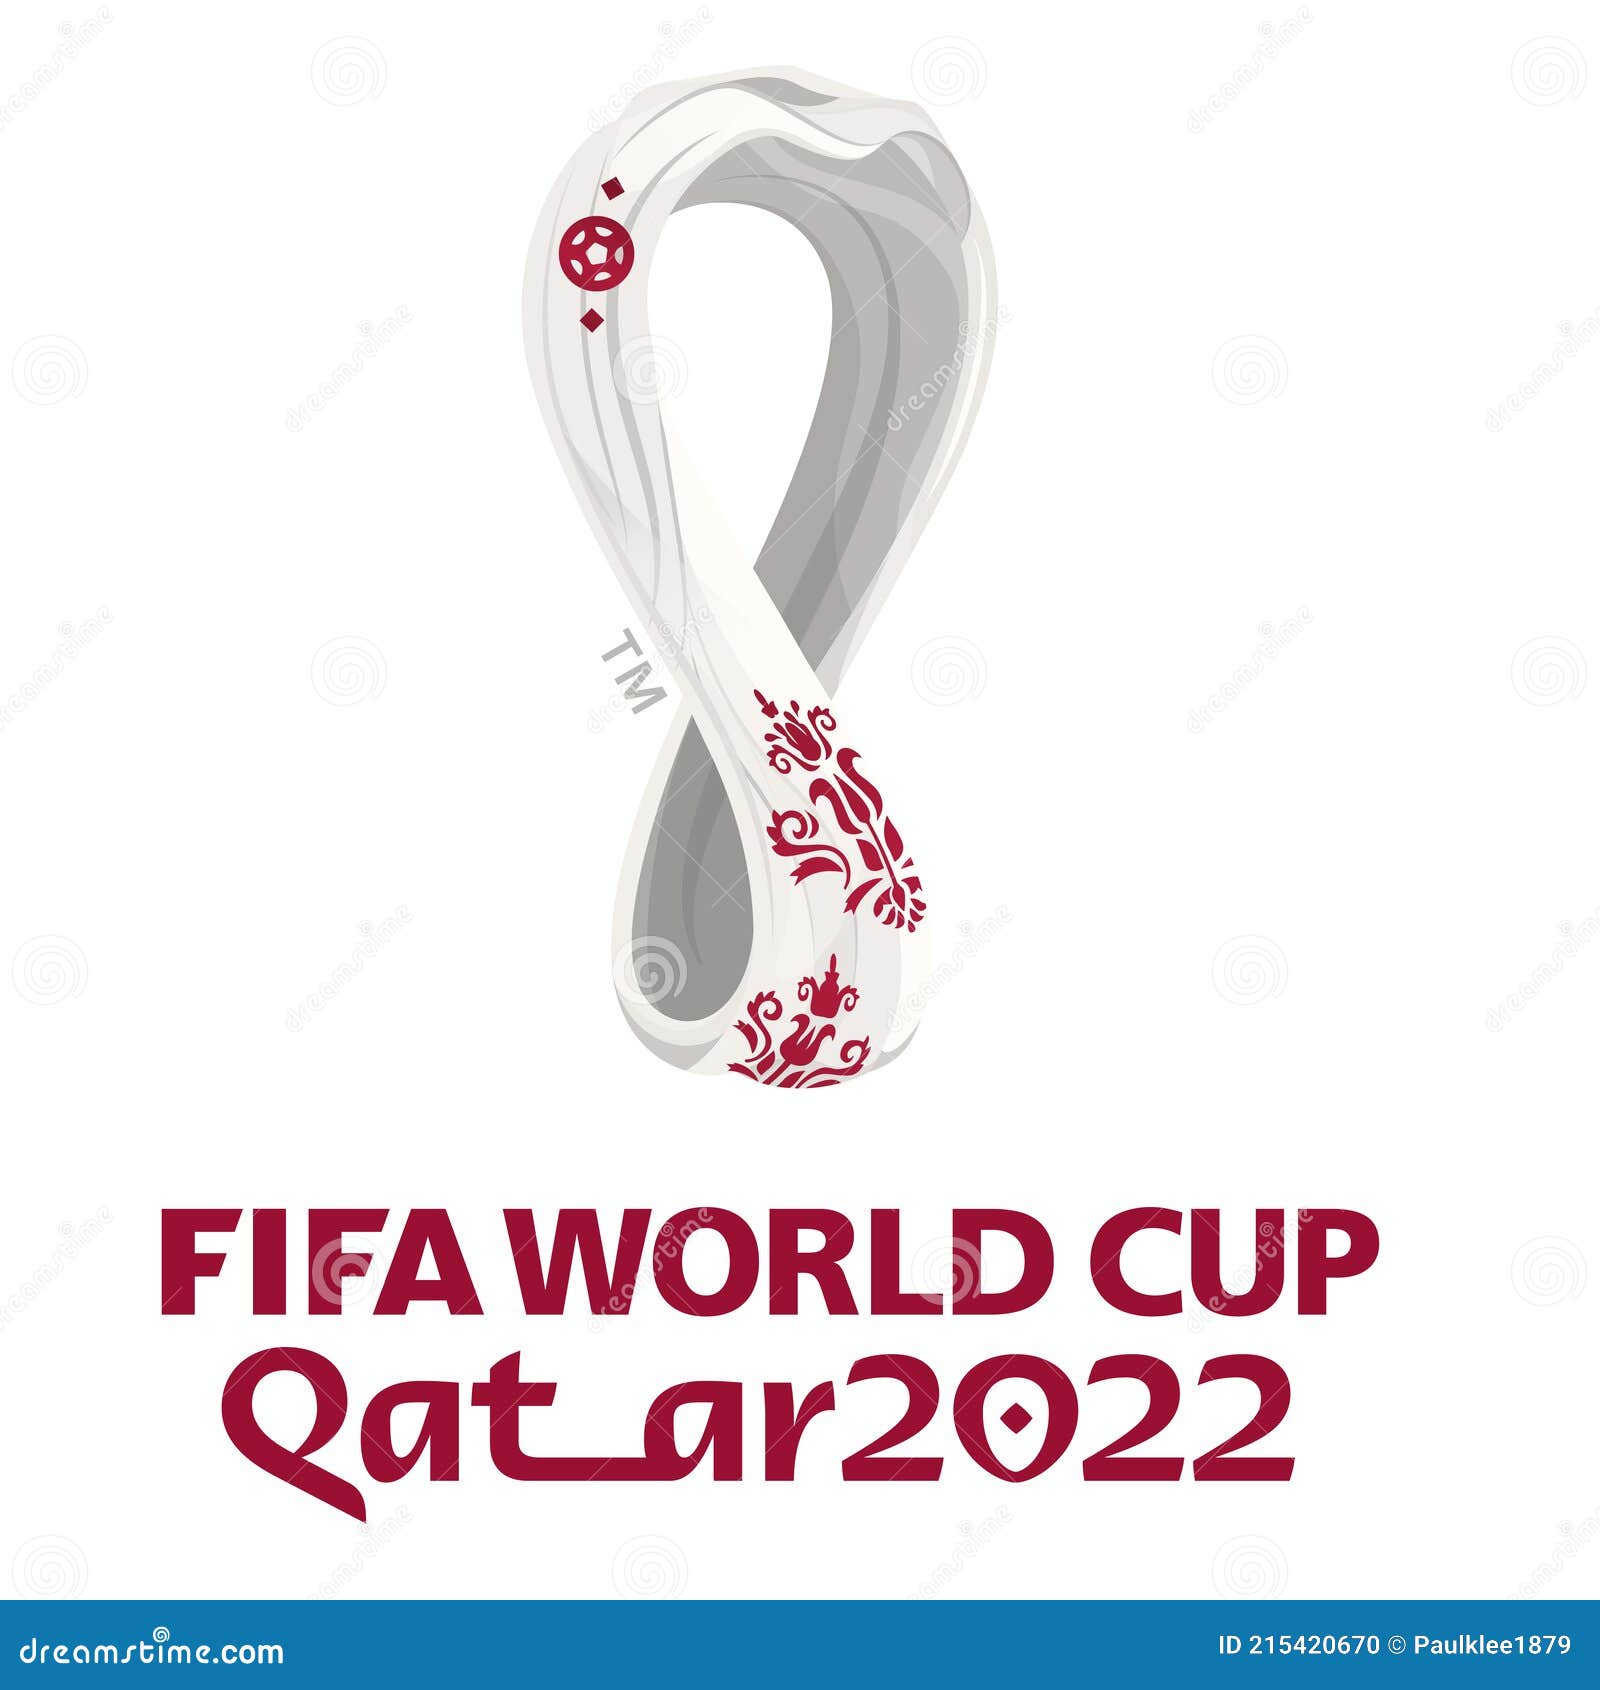 Fifa World Cup 2022 Logo on White Background Editorial Image ...